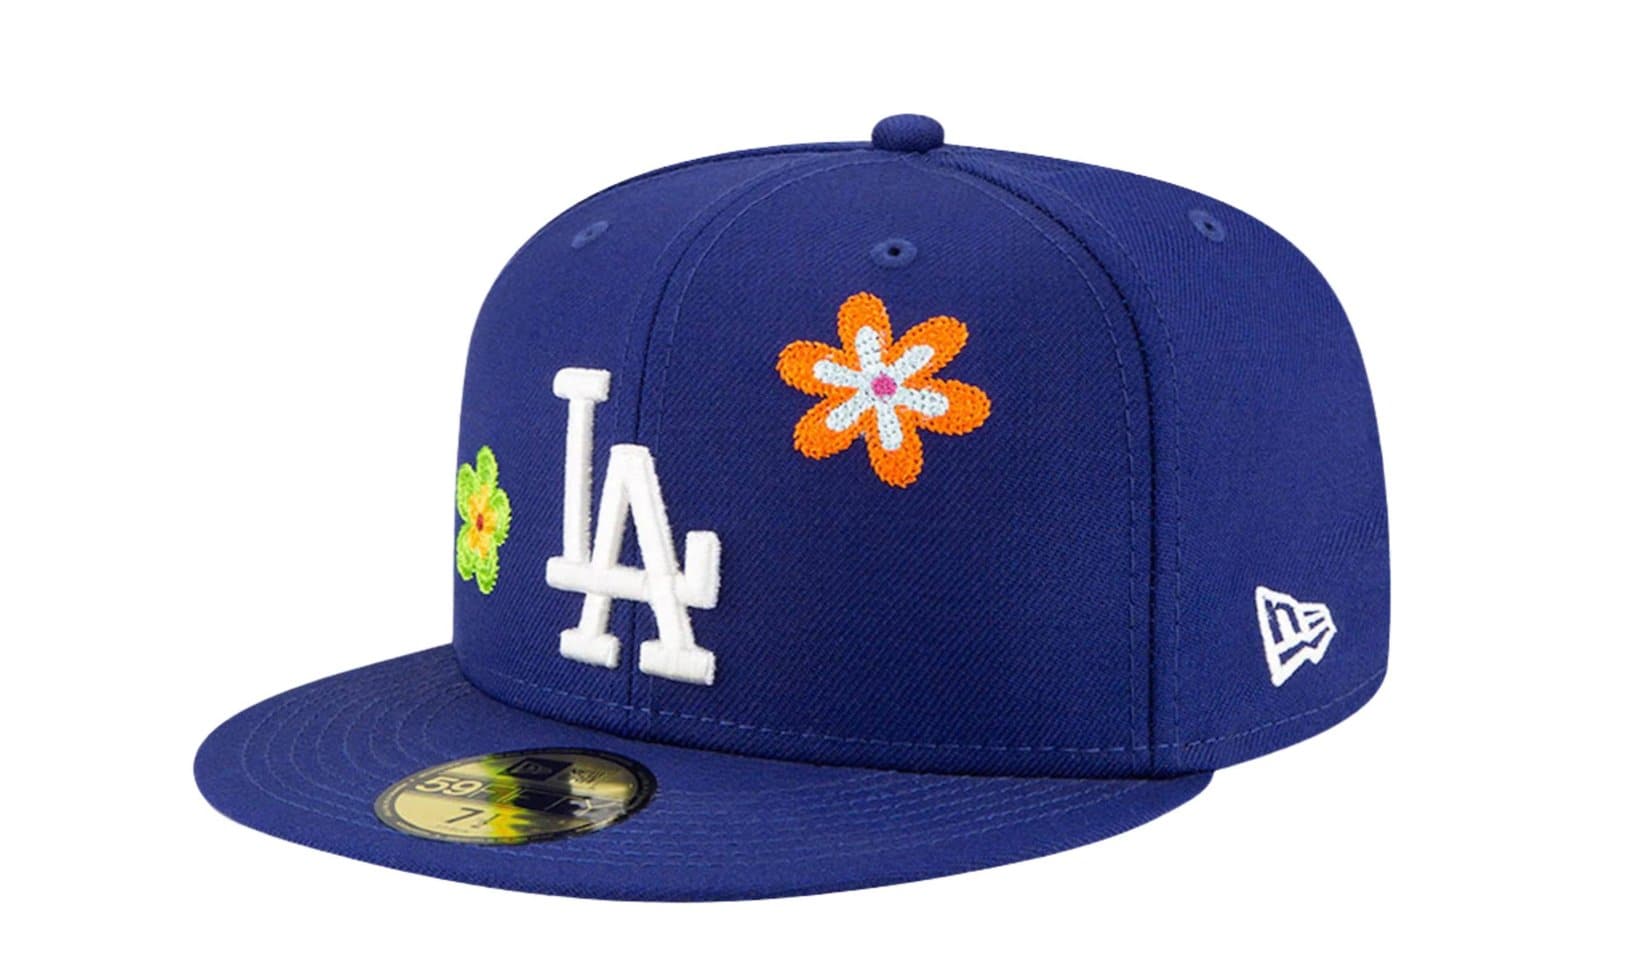 NEW ERA - 59FIFTY LOS ANGELES DODGERS / FLOWER POWER FITTED CAP / PINK UNDERBRIM (ROYAL) - The Magnolia Park